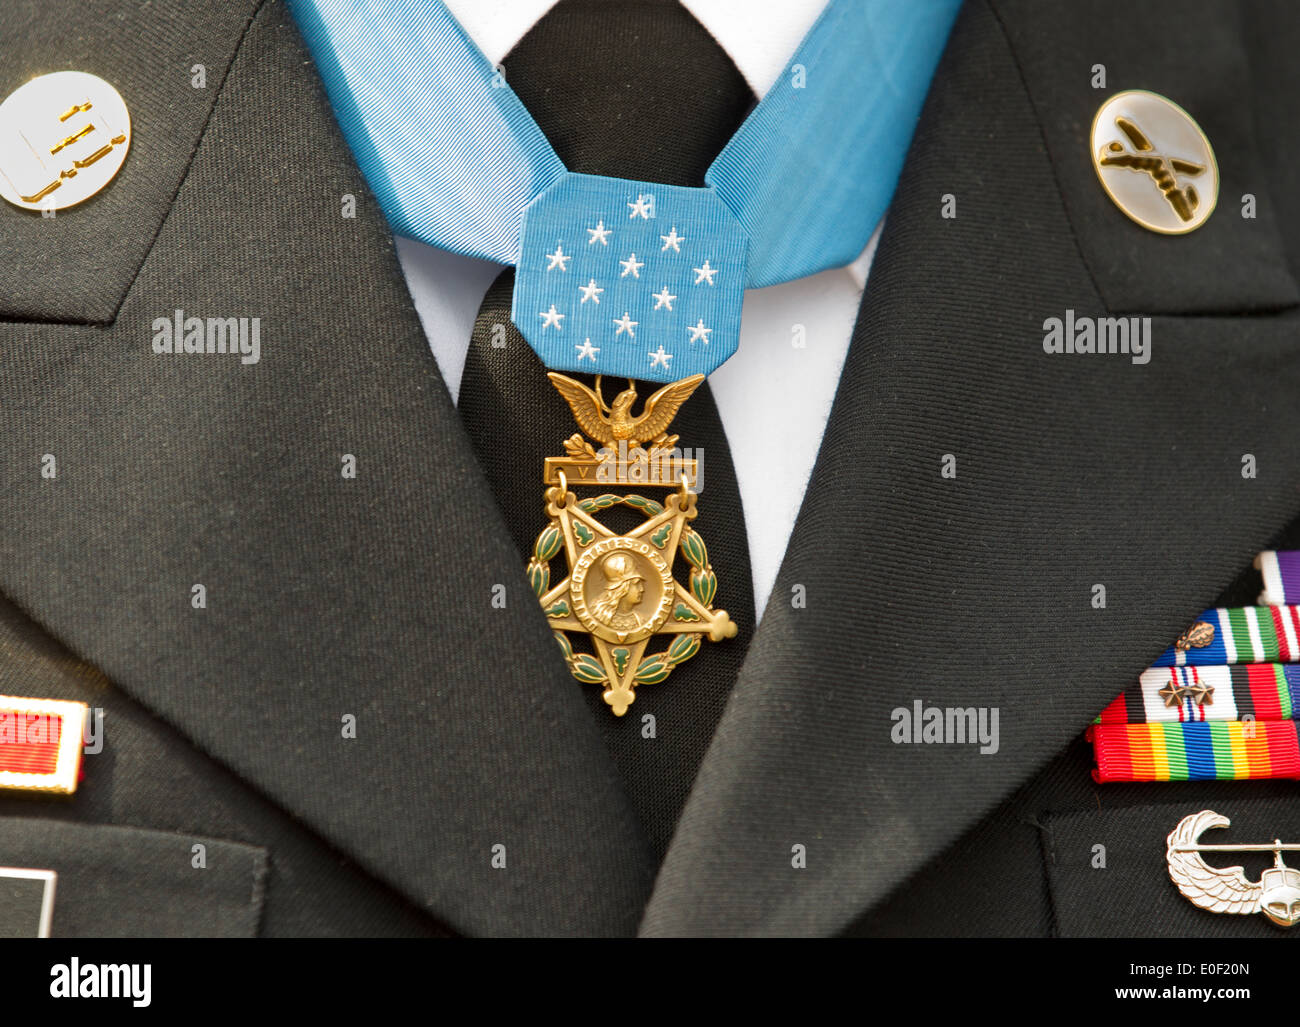 The Medal of Honor worn by a United States Army veteran Stock Photo